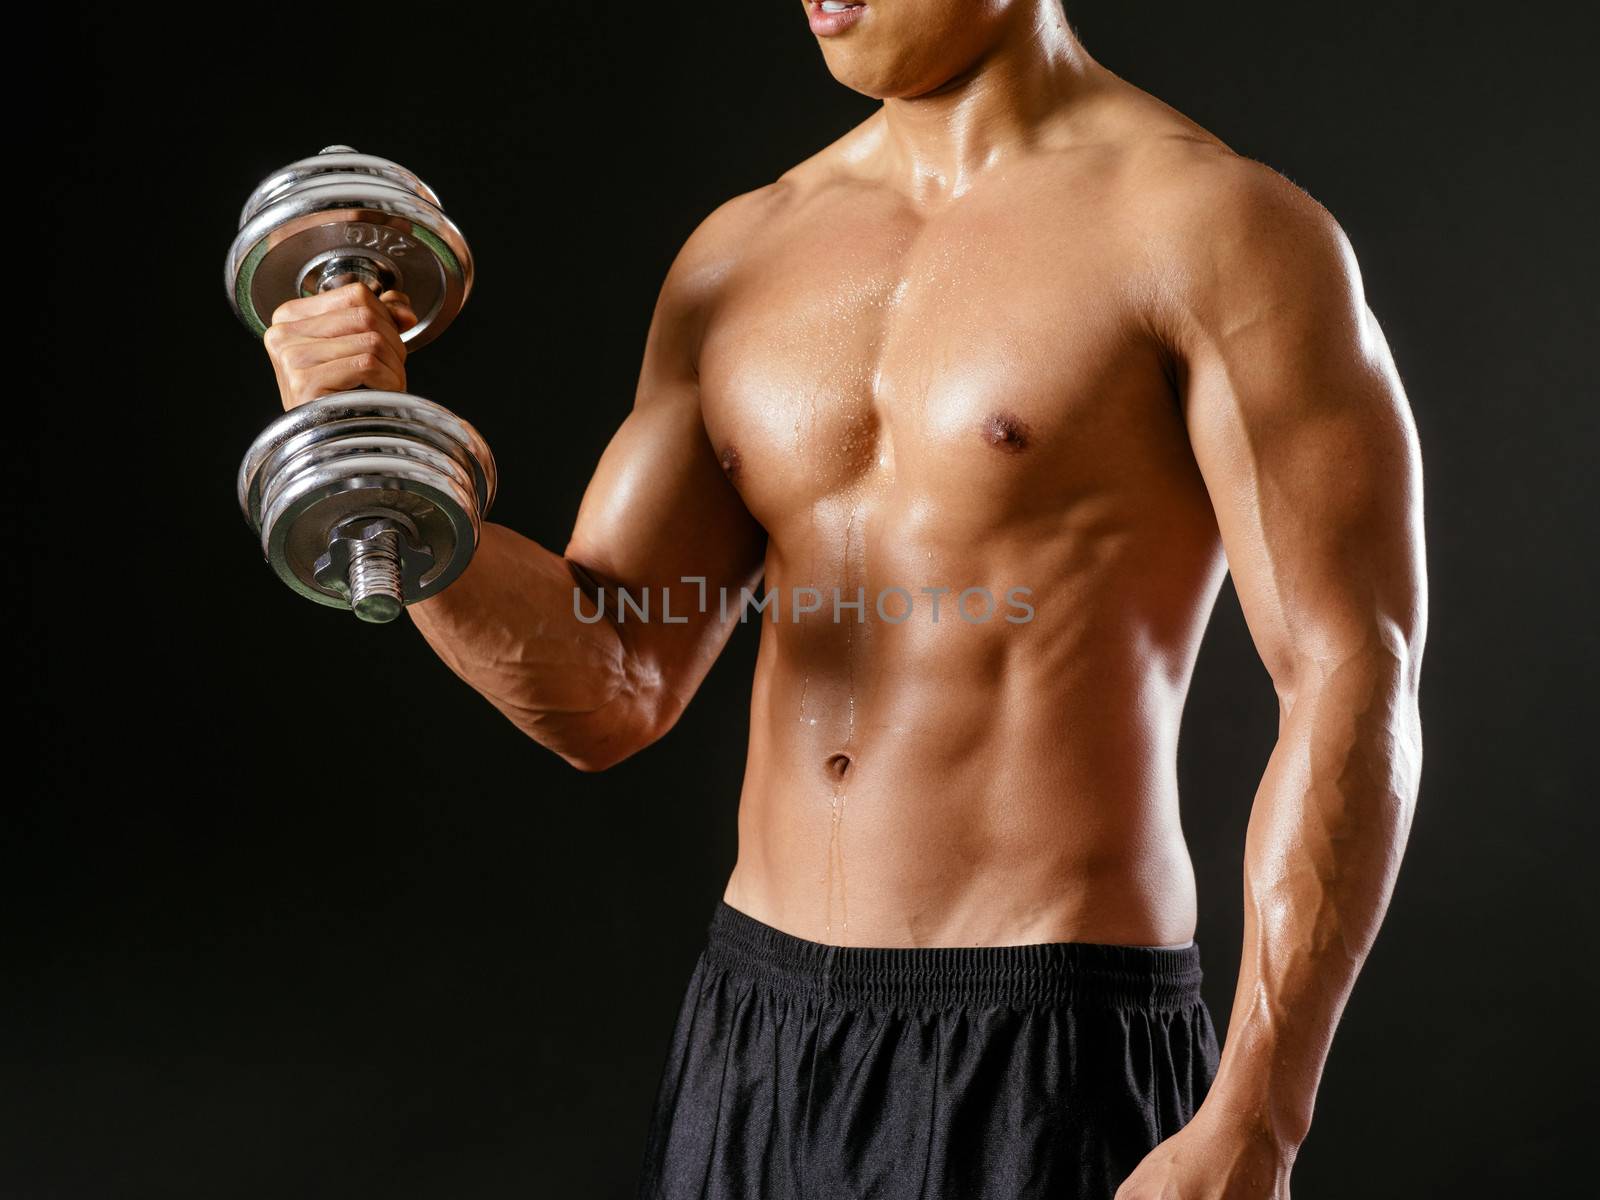 Photo of an Asian male exercising with dumbbells and doing bicep curls over dark background.